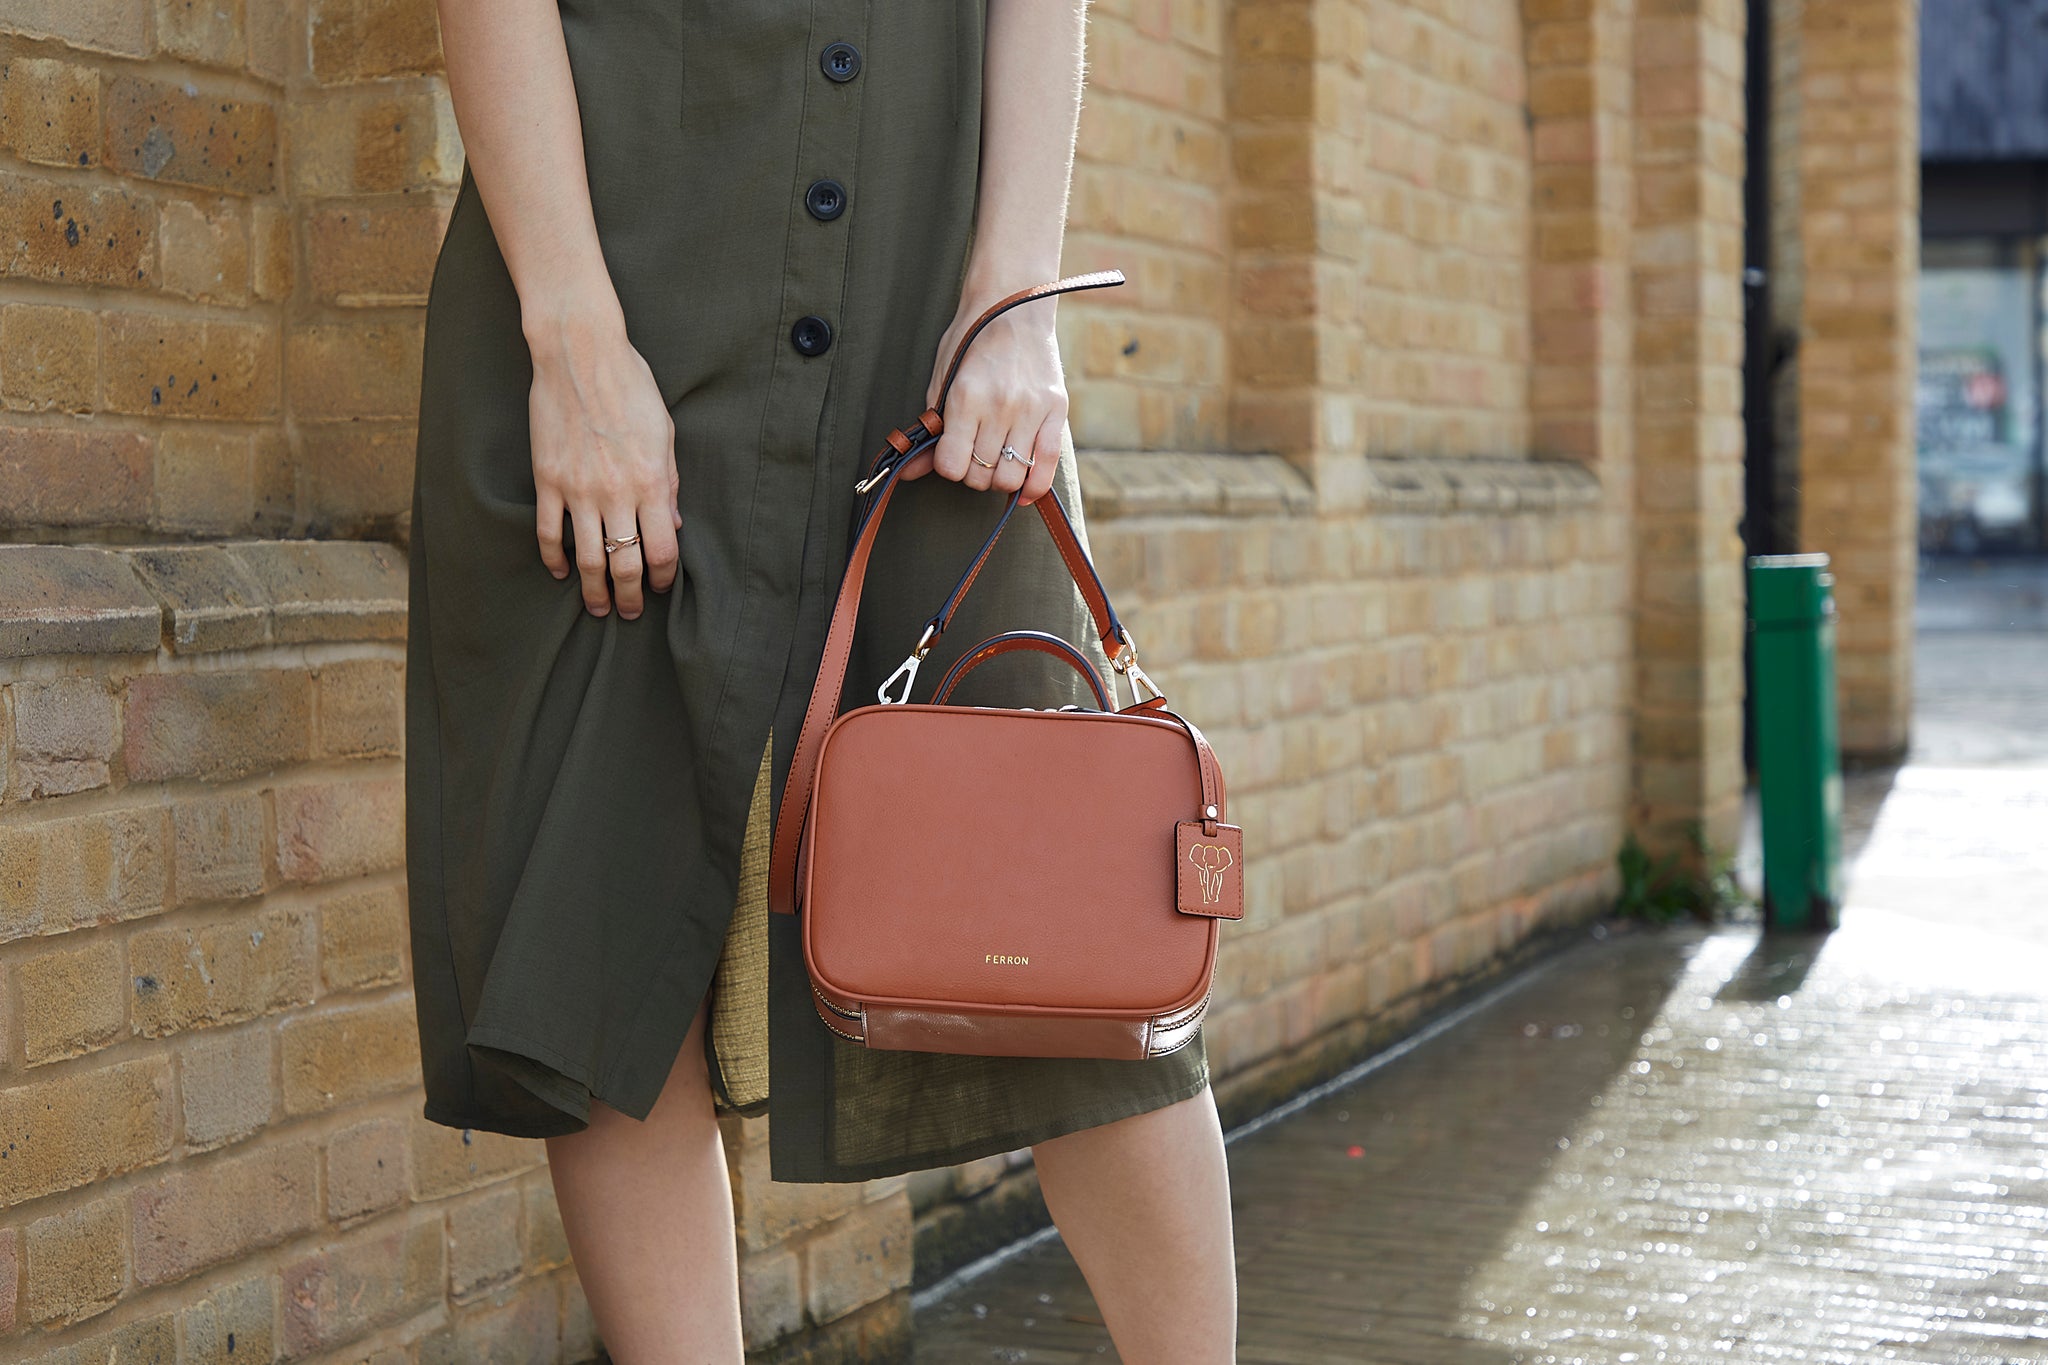 Model holding the crossbody bag by handle